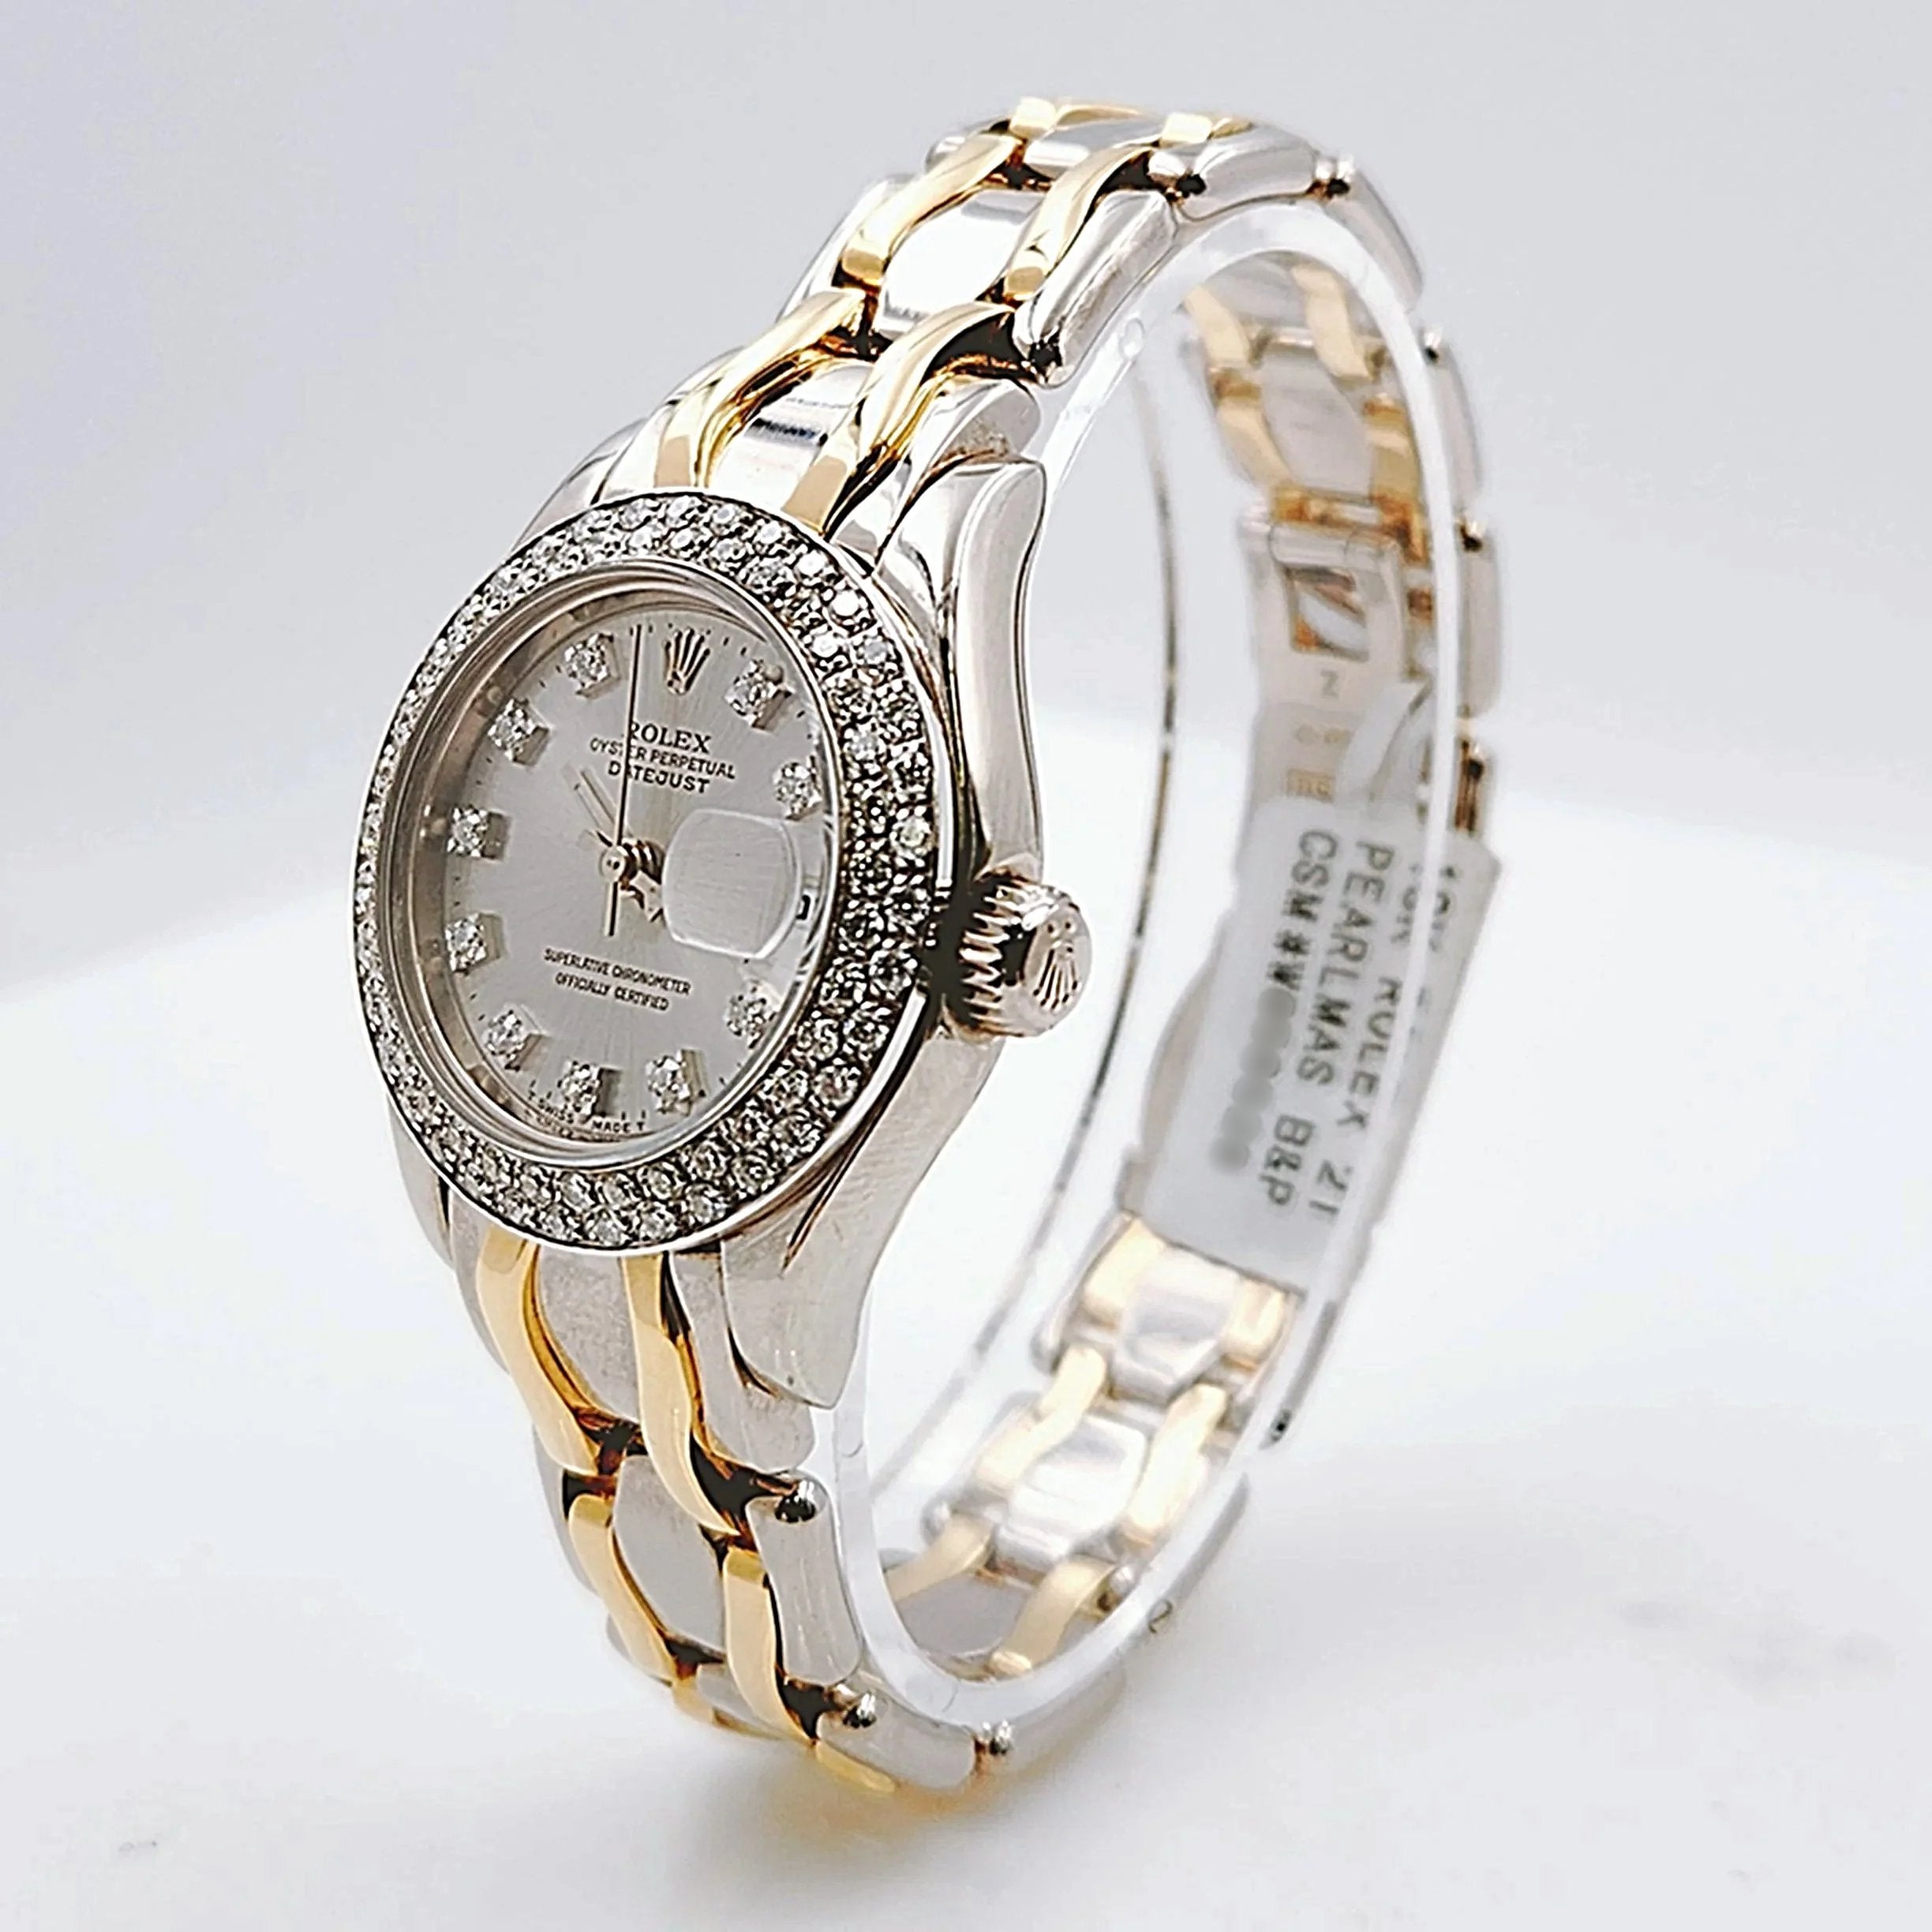 Ladies Rolex 29mm Pearlmaster Two Tone 18K White Gold / 18K Yellow Gold Watch with Silver Diamond Dial and Diamond Bezel. (Pre-Owned 69329)